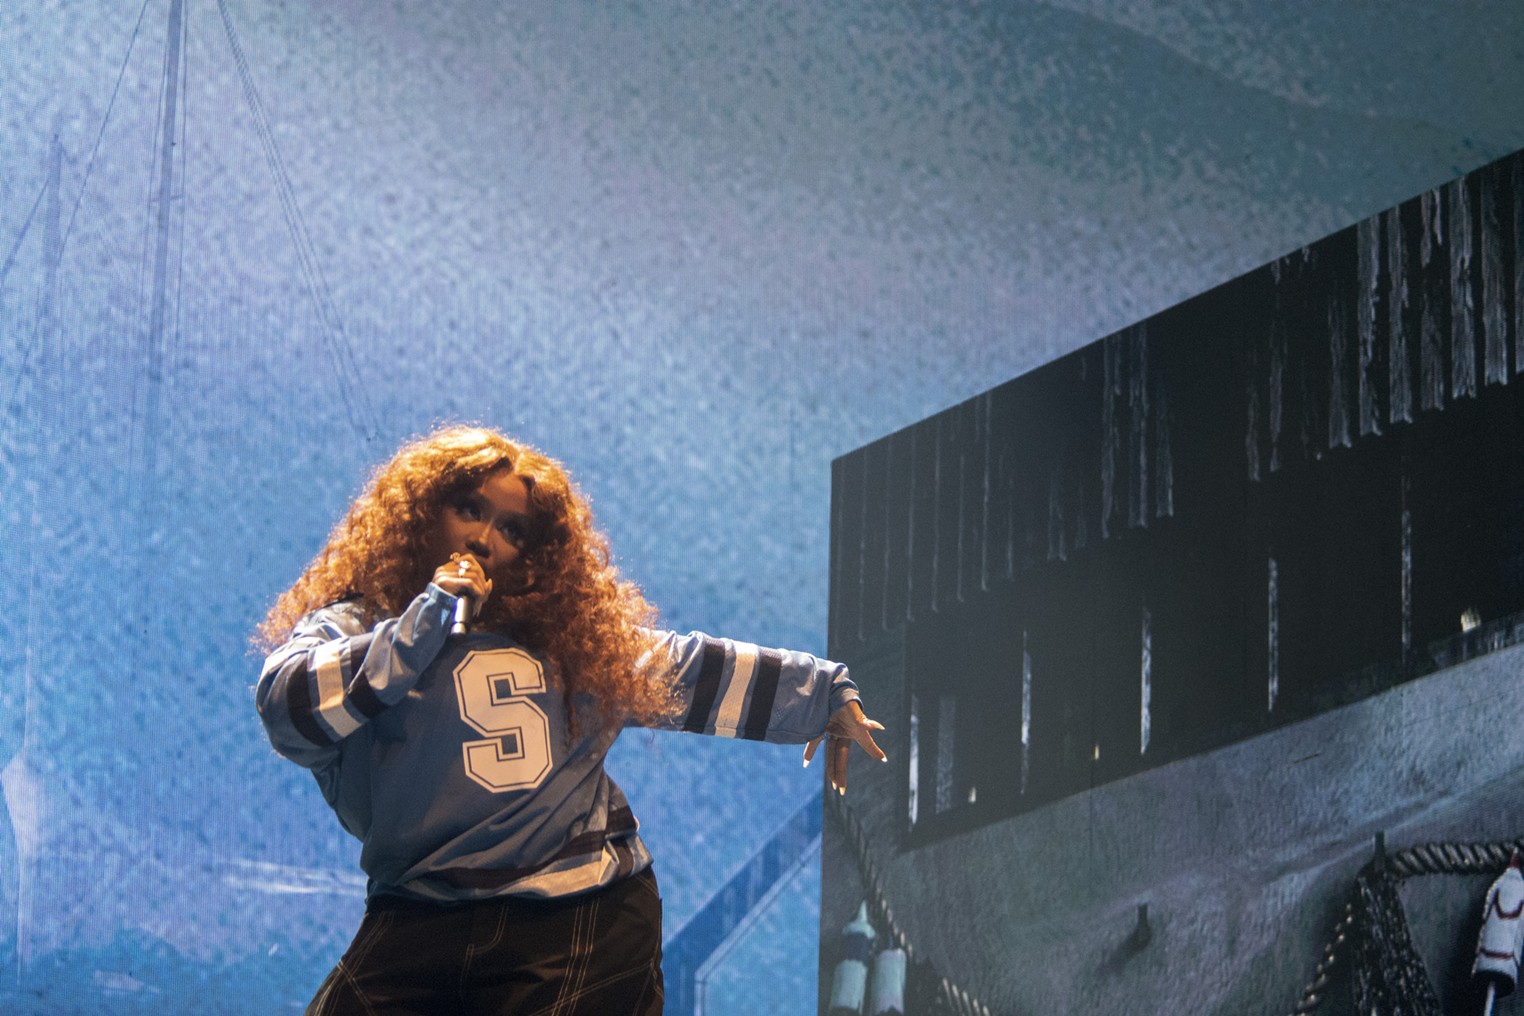 SZA and Omar Apollo put on an emotional show in Dallas